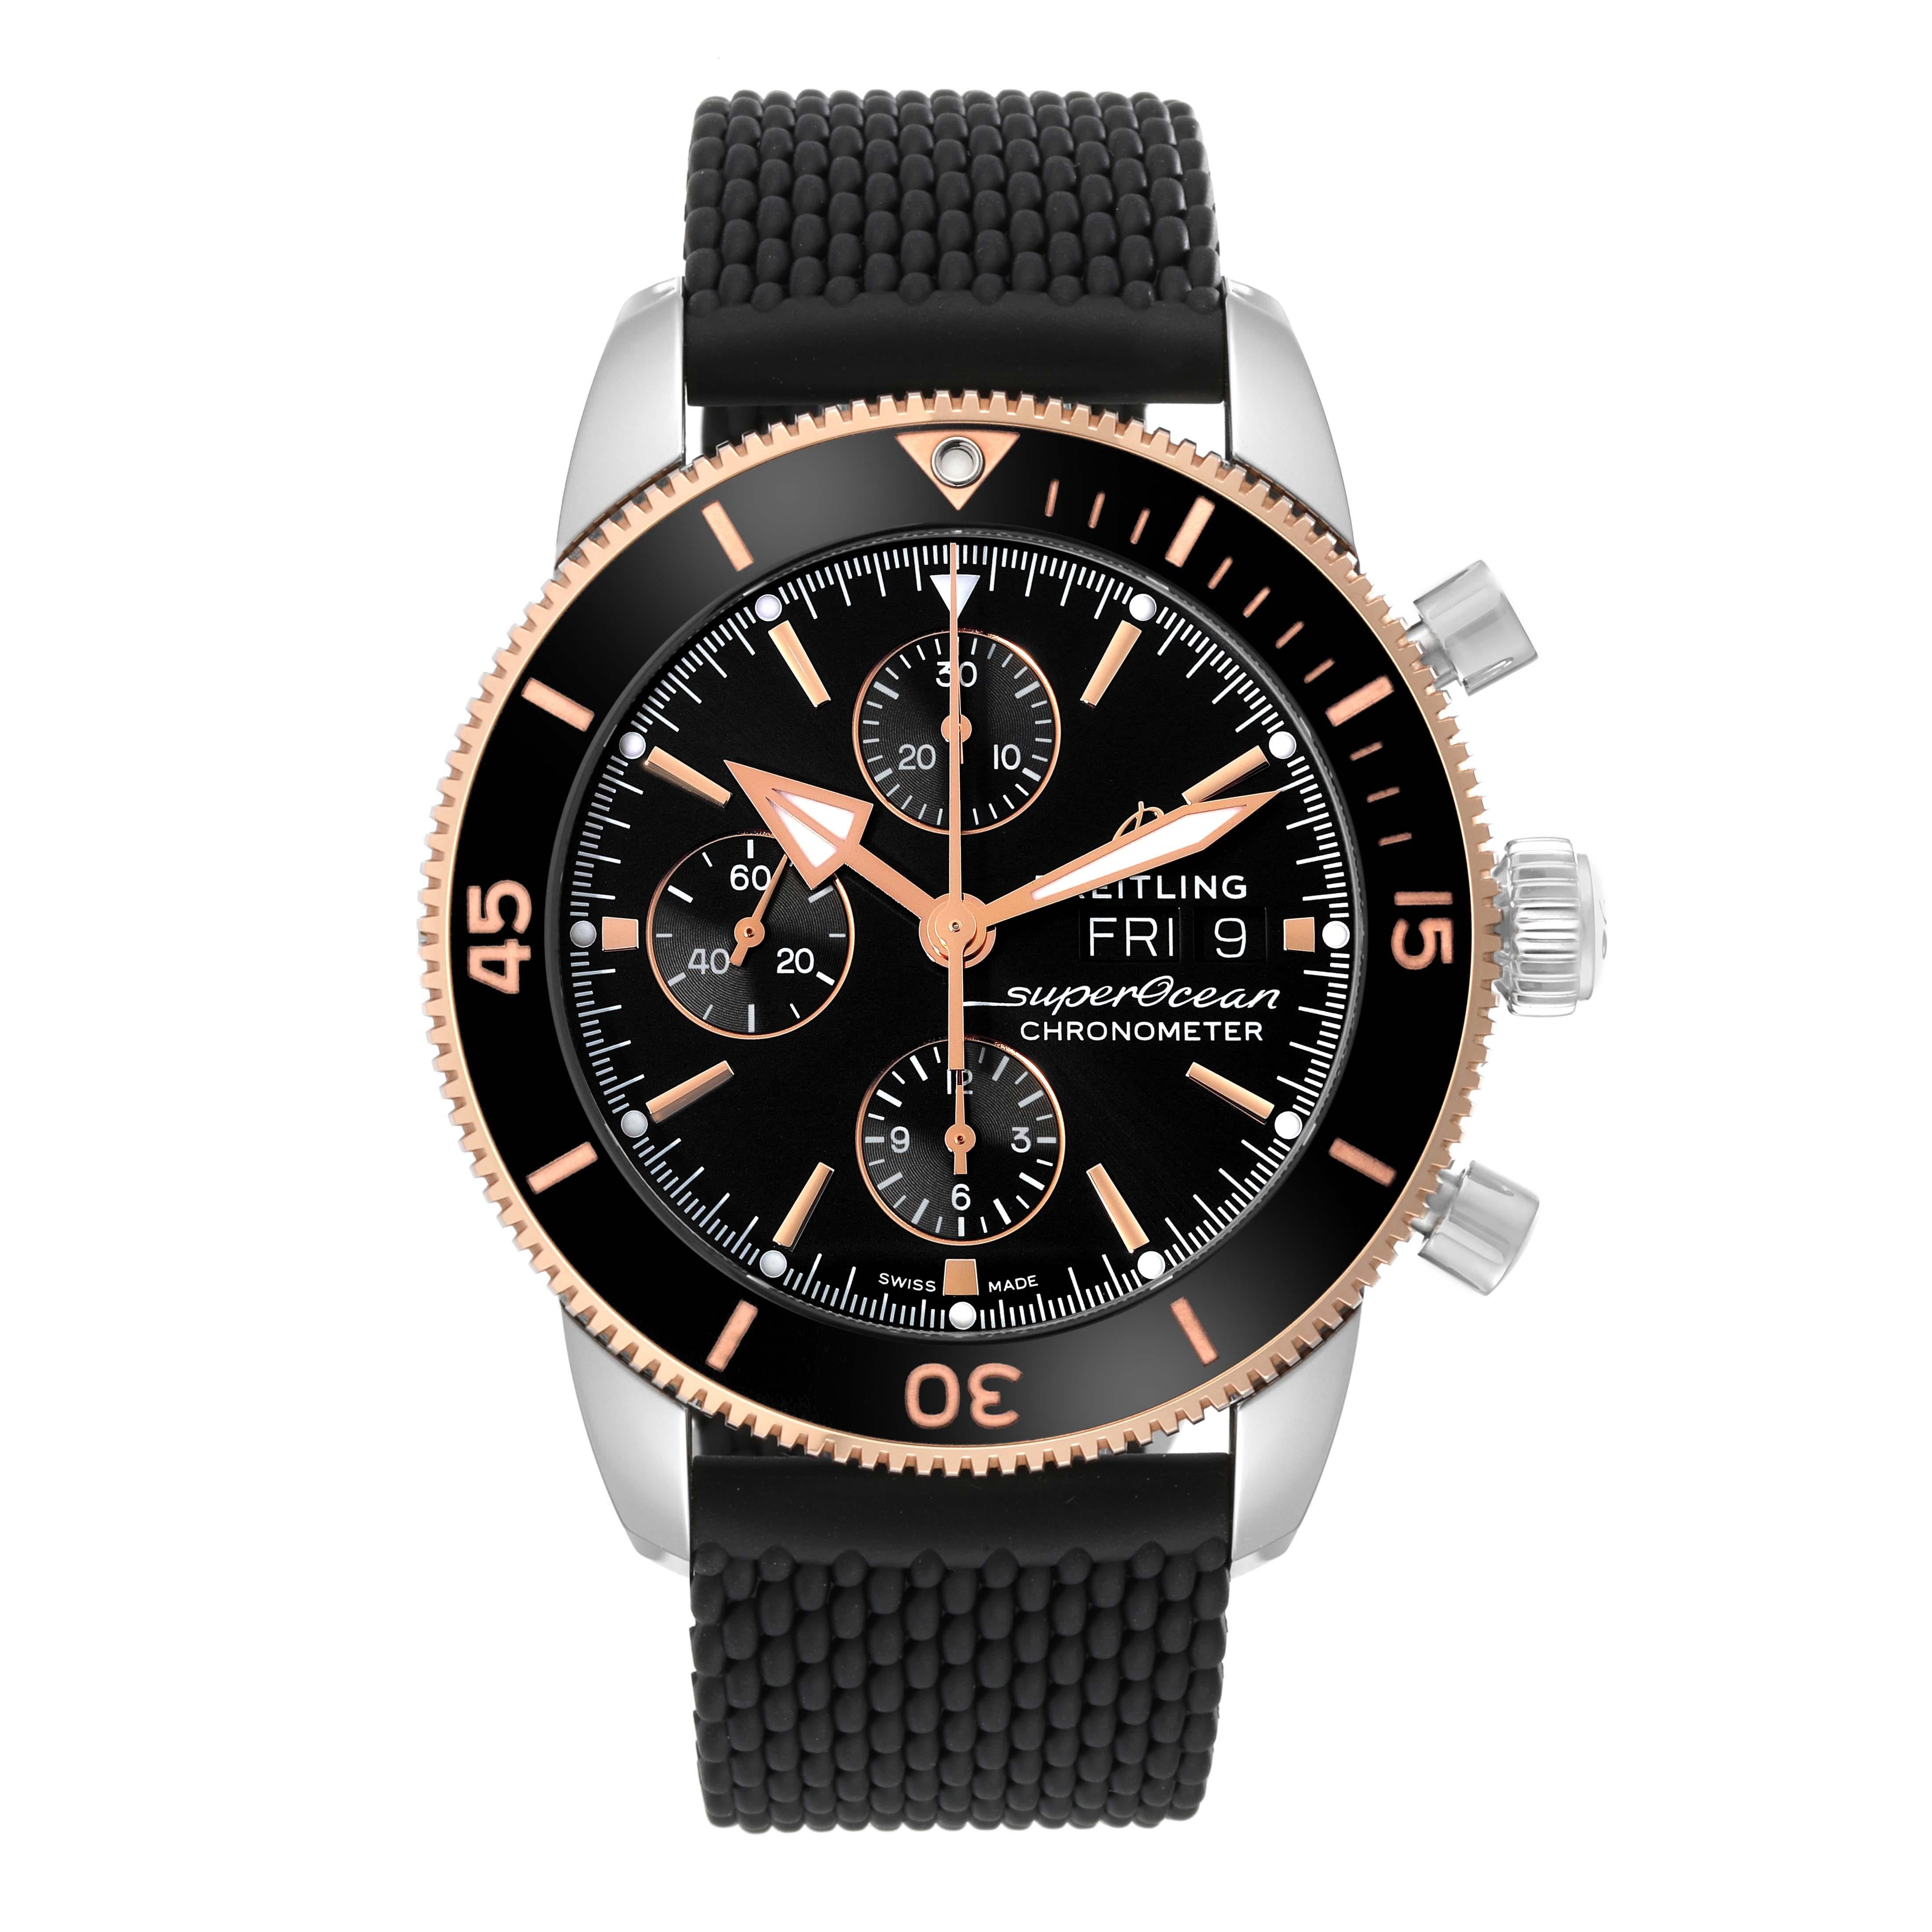 Breitling Superocean Heritage II Steel Rose Gold Mens Watch U13313. Automatic self-winding chronograph movement. Stainless steel case 44.0 mm in diameter. 18K rose gold and black ceramic unidirectional revolving bezel. Scratch resistant sapphire